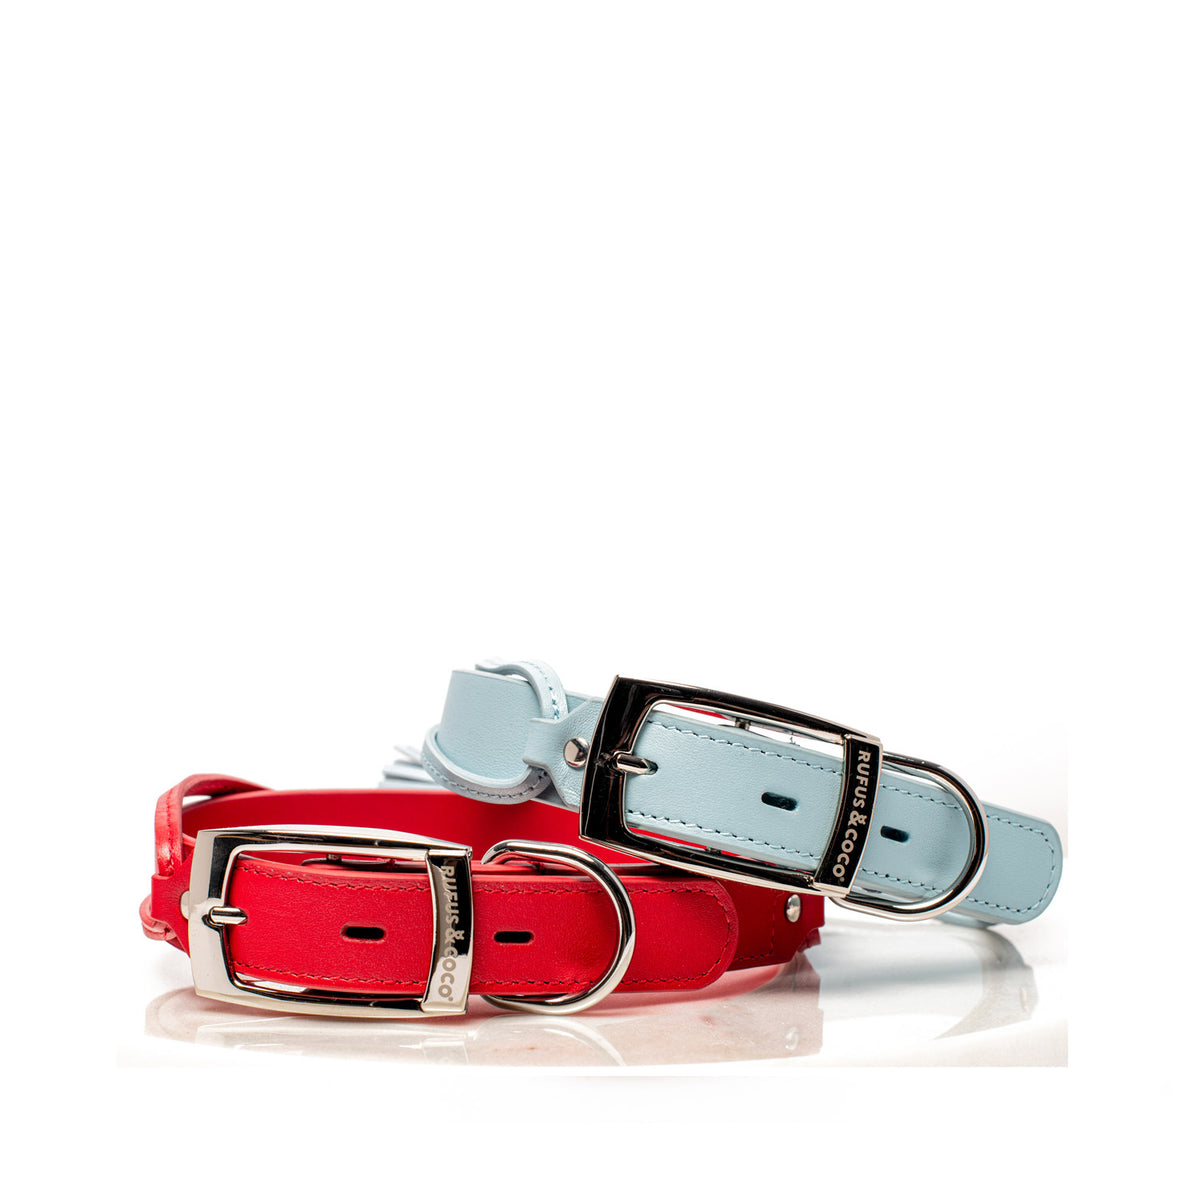 Rufus & Coco's Paris red leather dog collar is made from 100% quality leather. Each collar is finished with red stitching, matching leather tassels and premium silver hardware for style and durability. This fashionable red leather dog collar is available in 4 sizes.